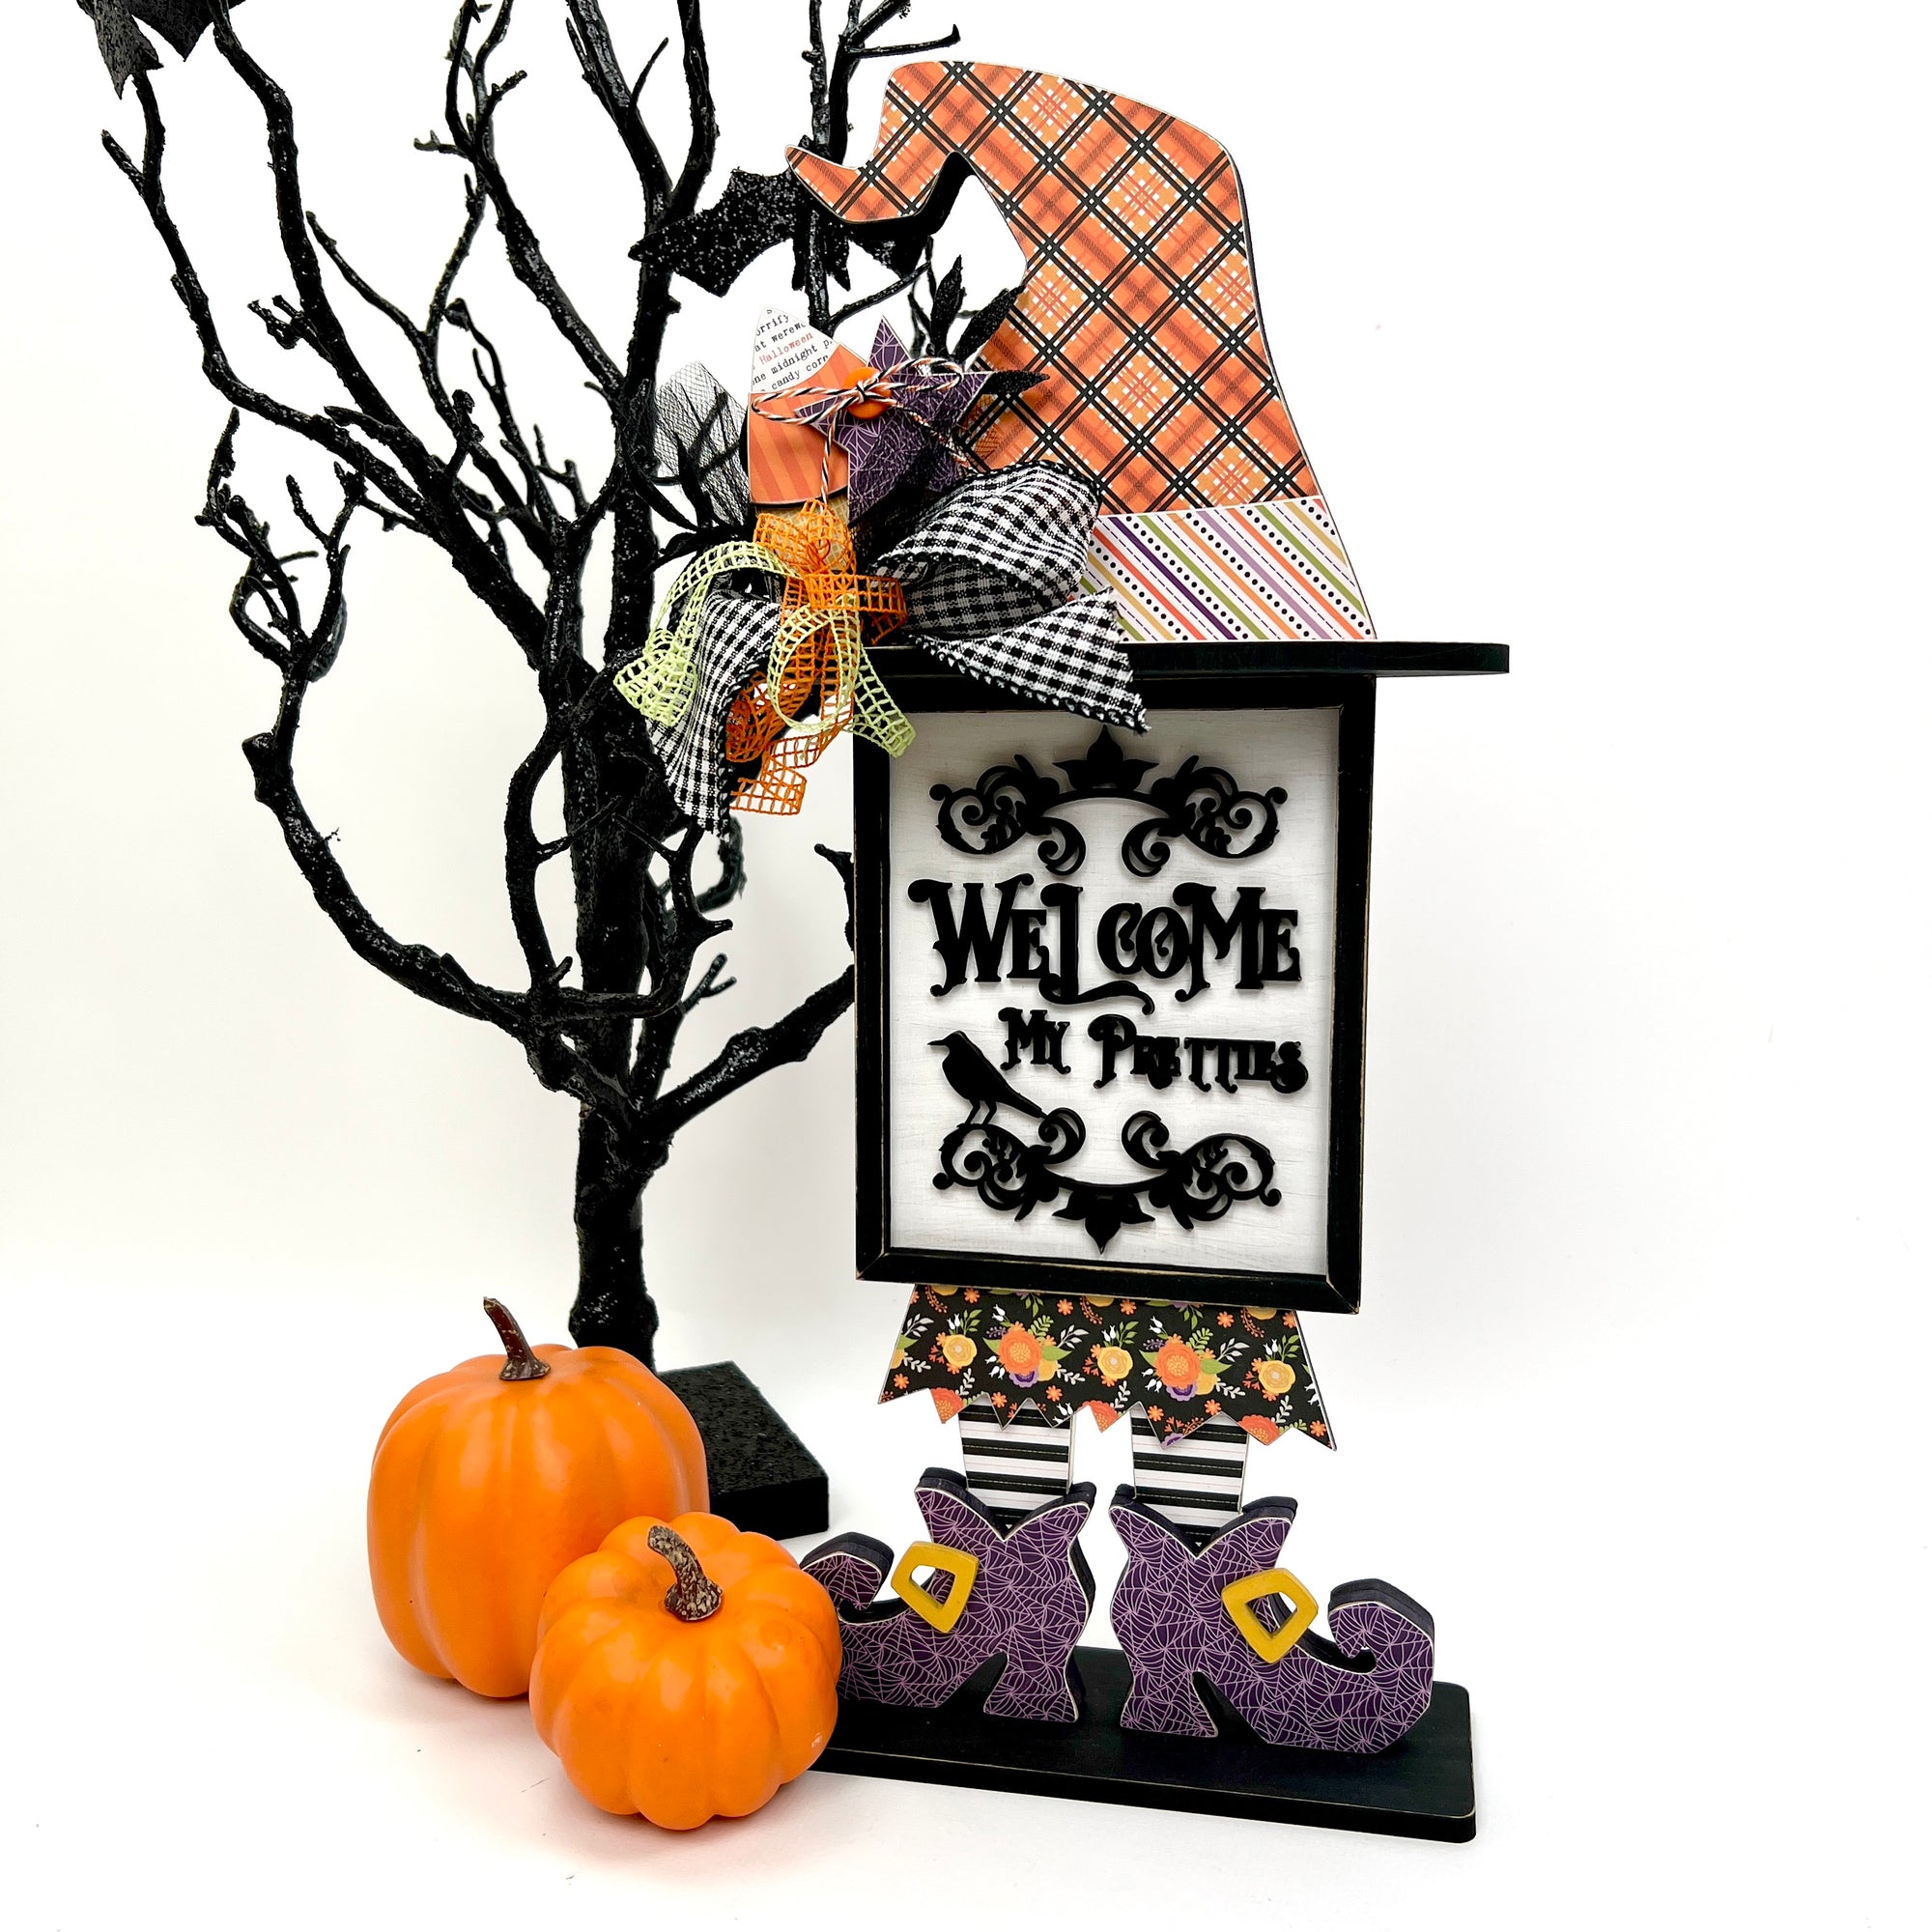 Welcome My Pretties witch wood Halloween decoration. 